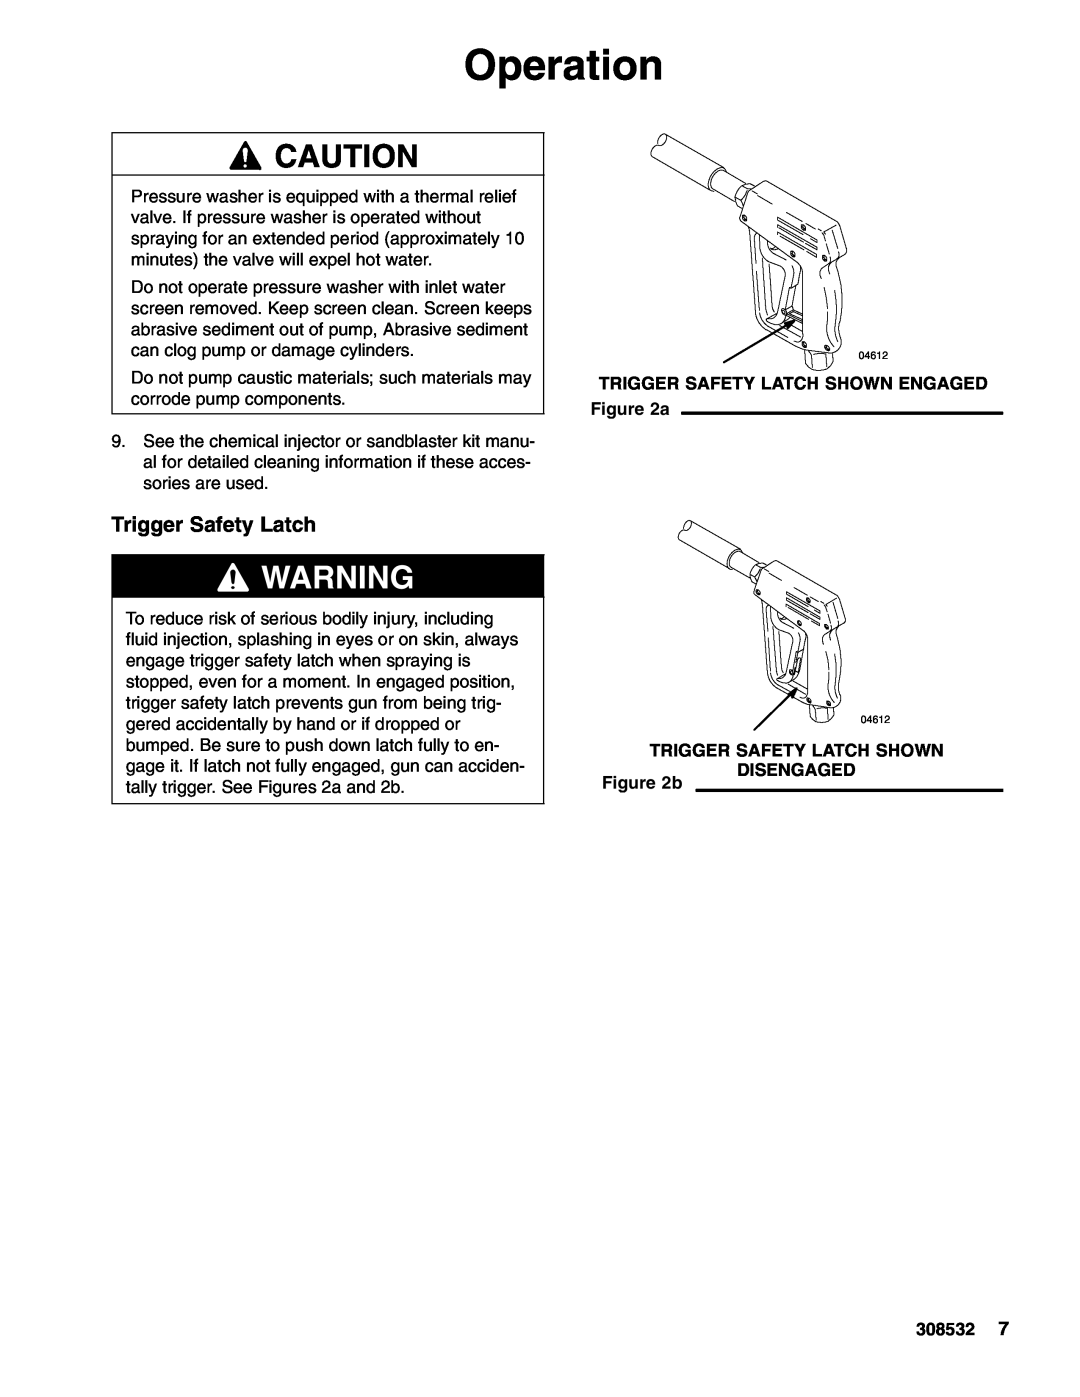 Hitachi 4043 important safety instructions Trigger Safety Latch, Operation, TRIGGER SAFETY LATCH SHOWN ENGAGED a, 308532 